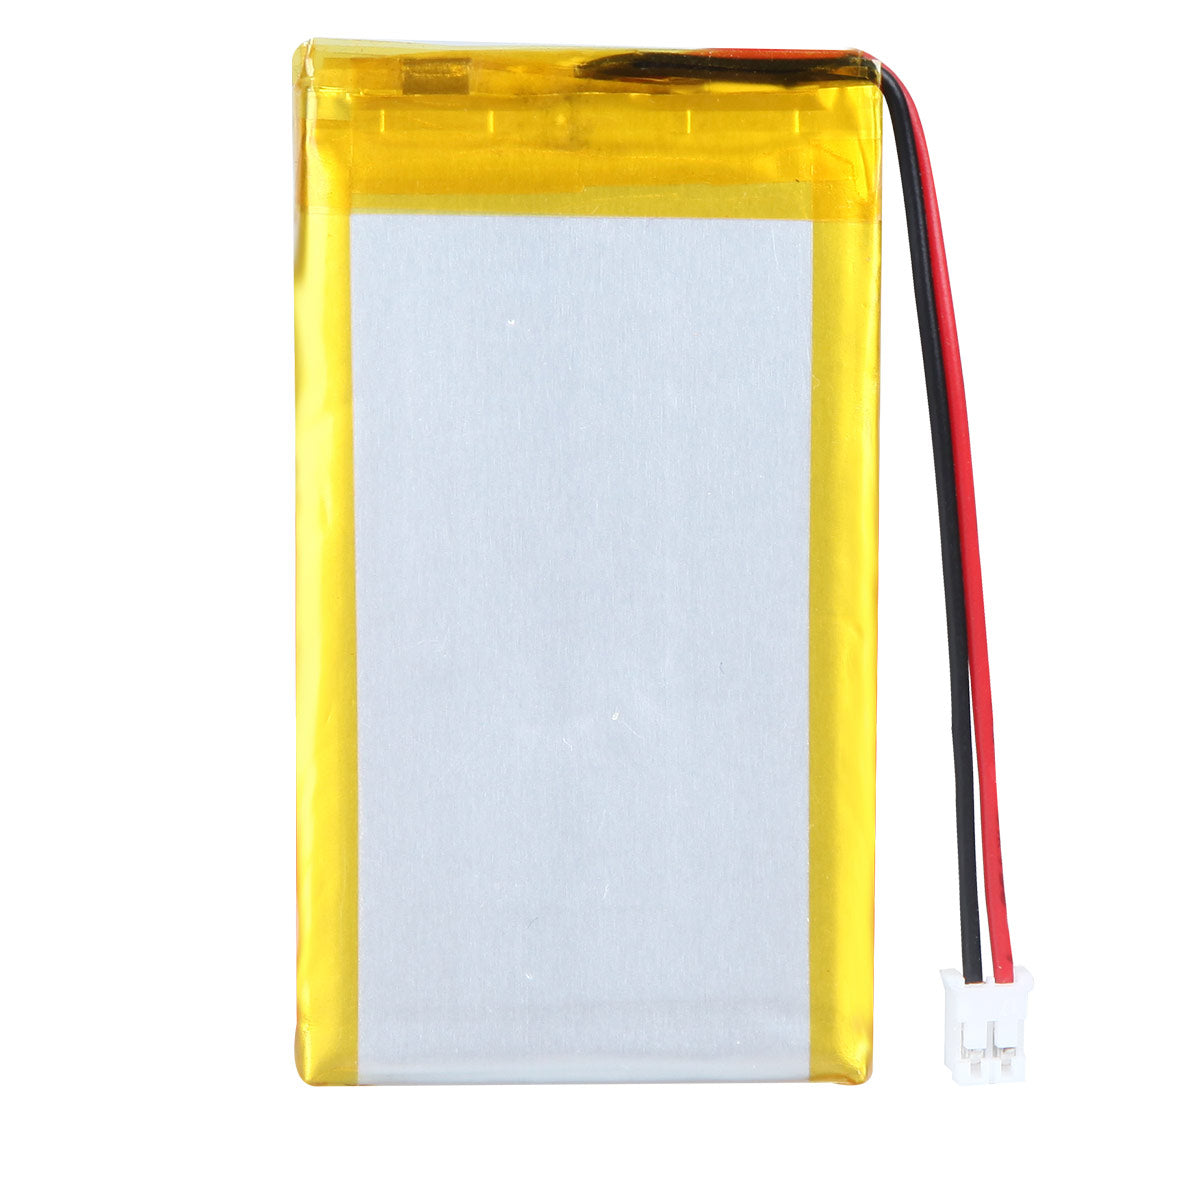 YDL 3.7V 1200mAh 503365 Rechargeable Lithium Polymer Battery Length 67mm